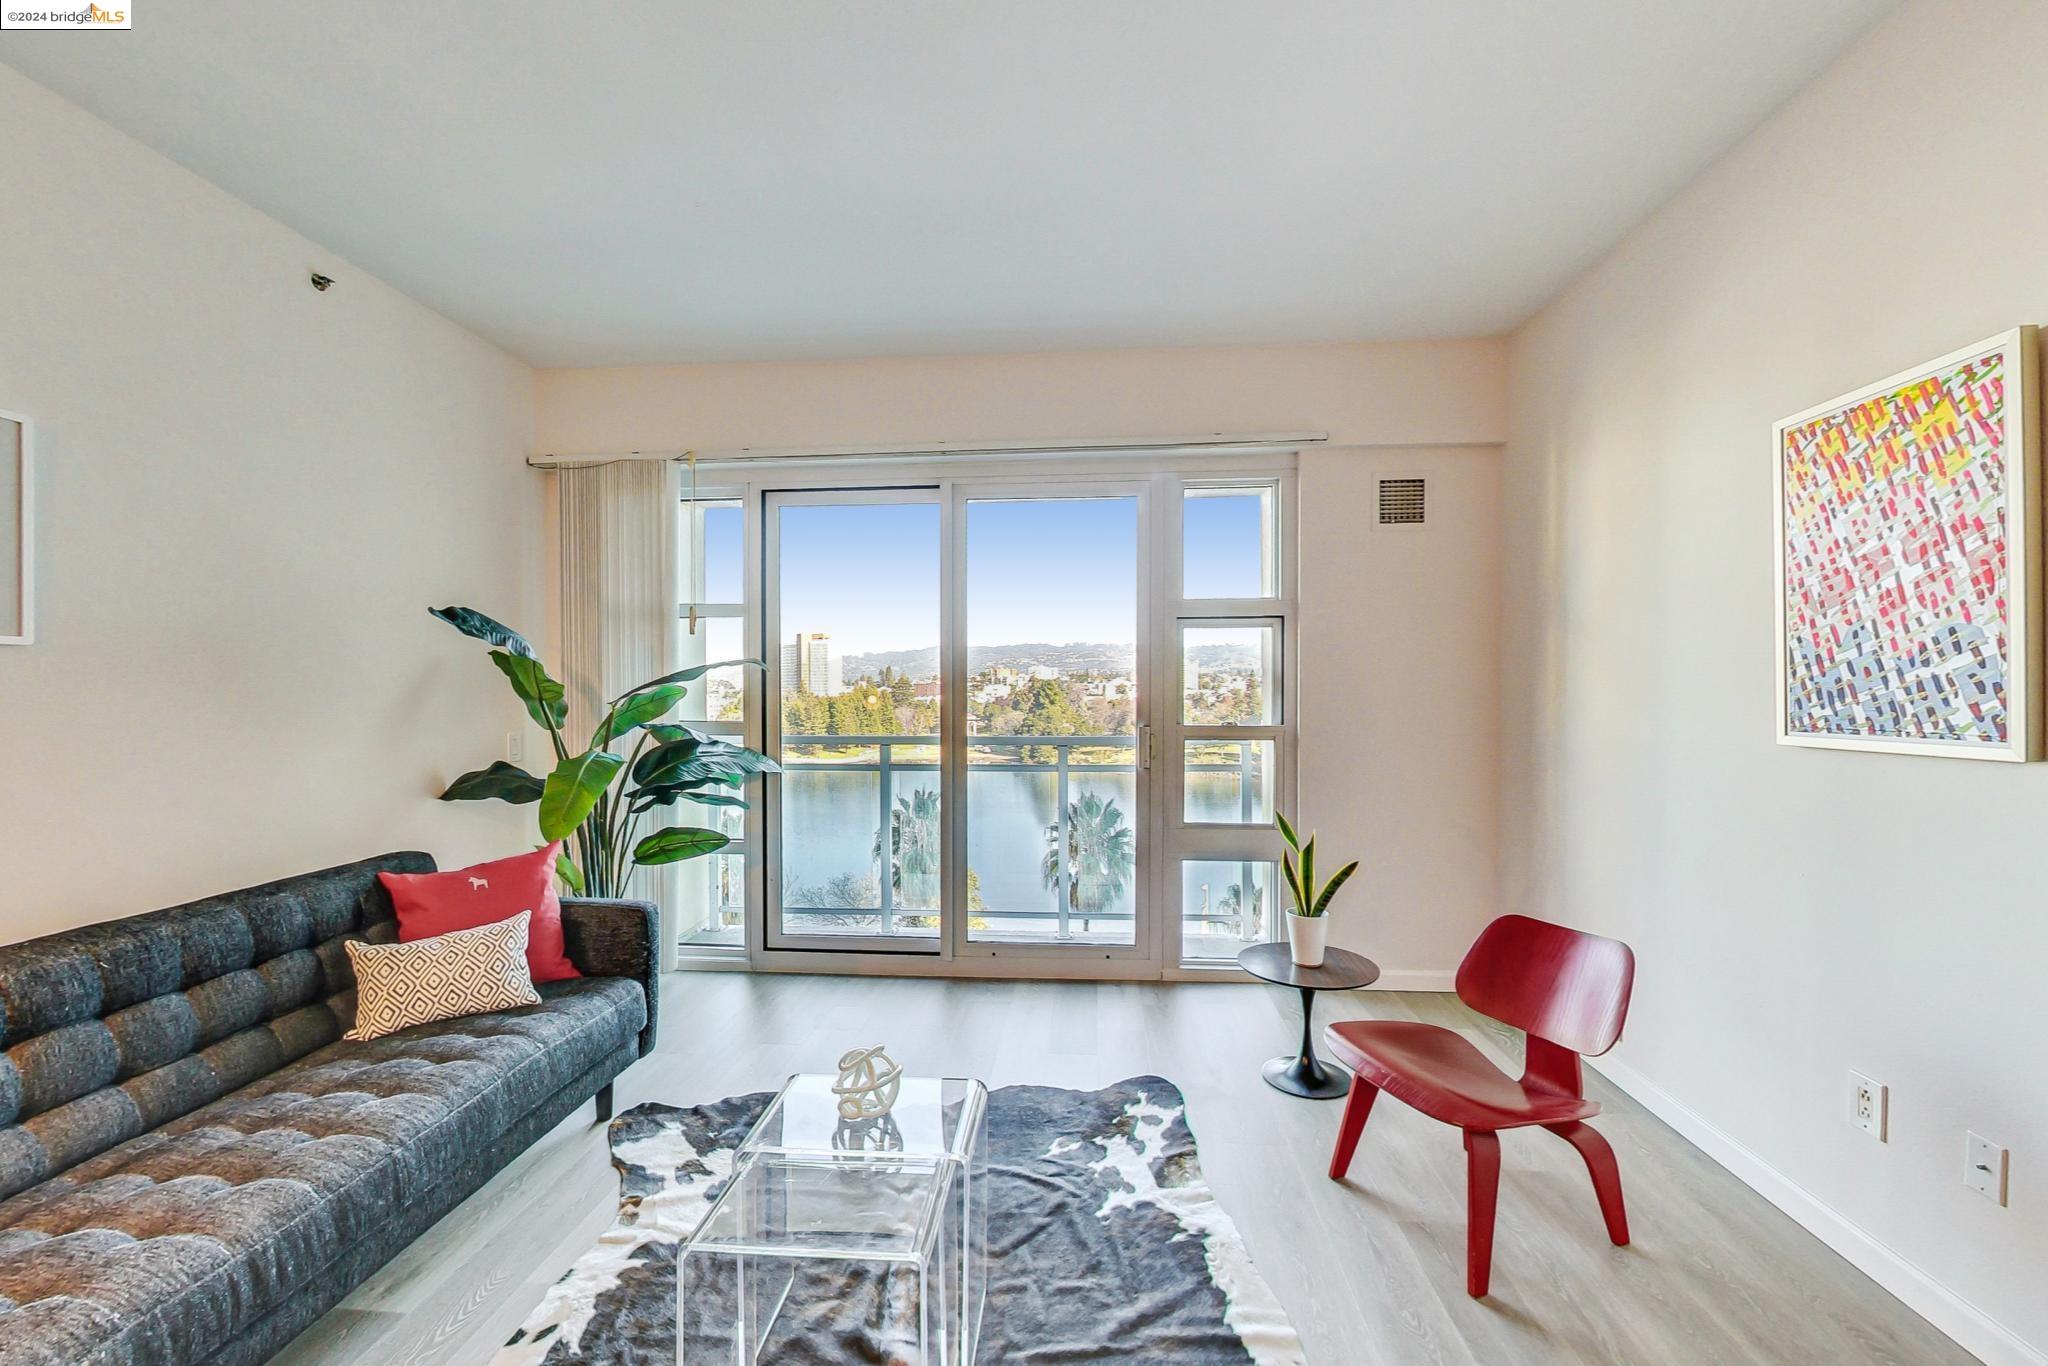 Condos, Lofts and Townhomes for Sale in Oakland High Rise Condos